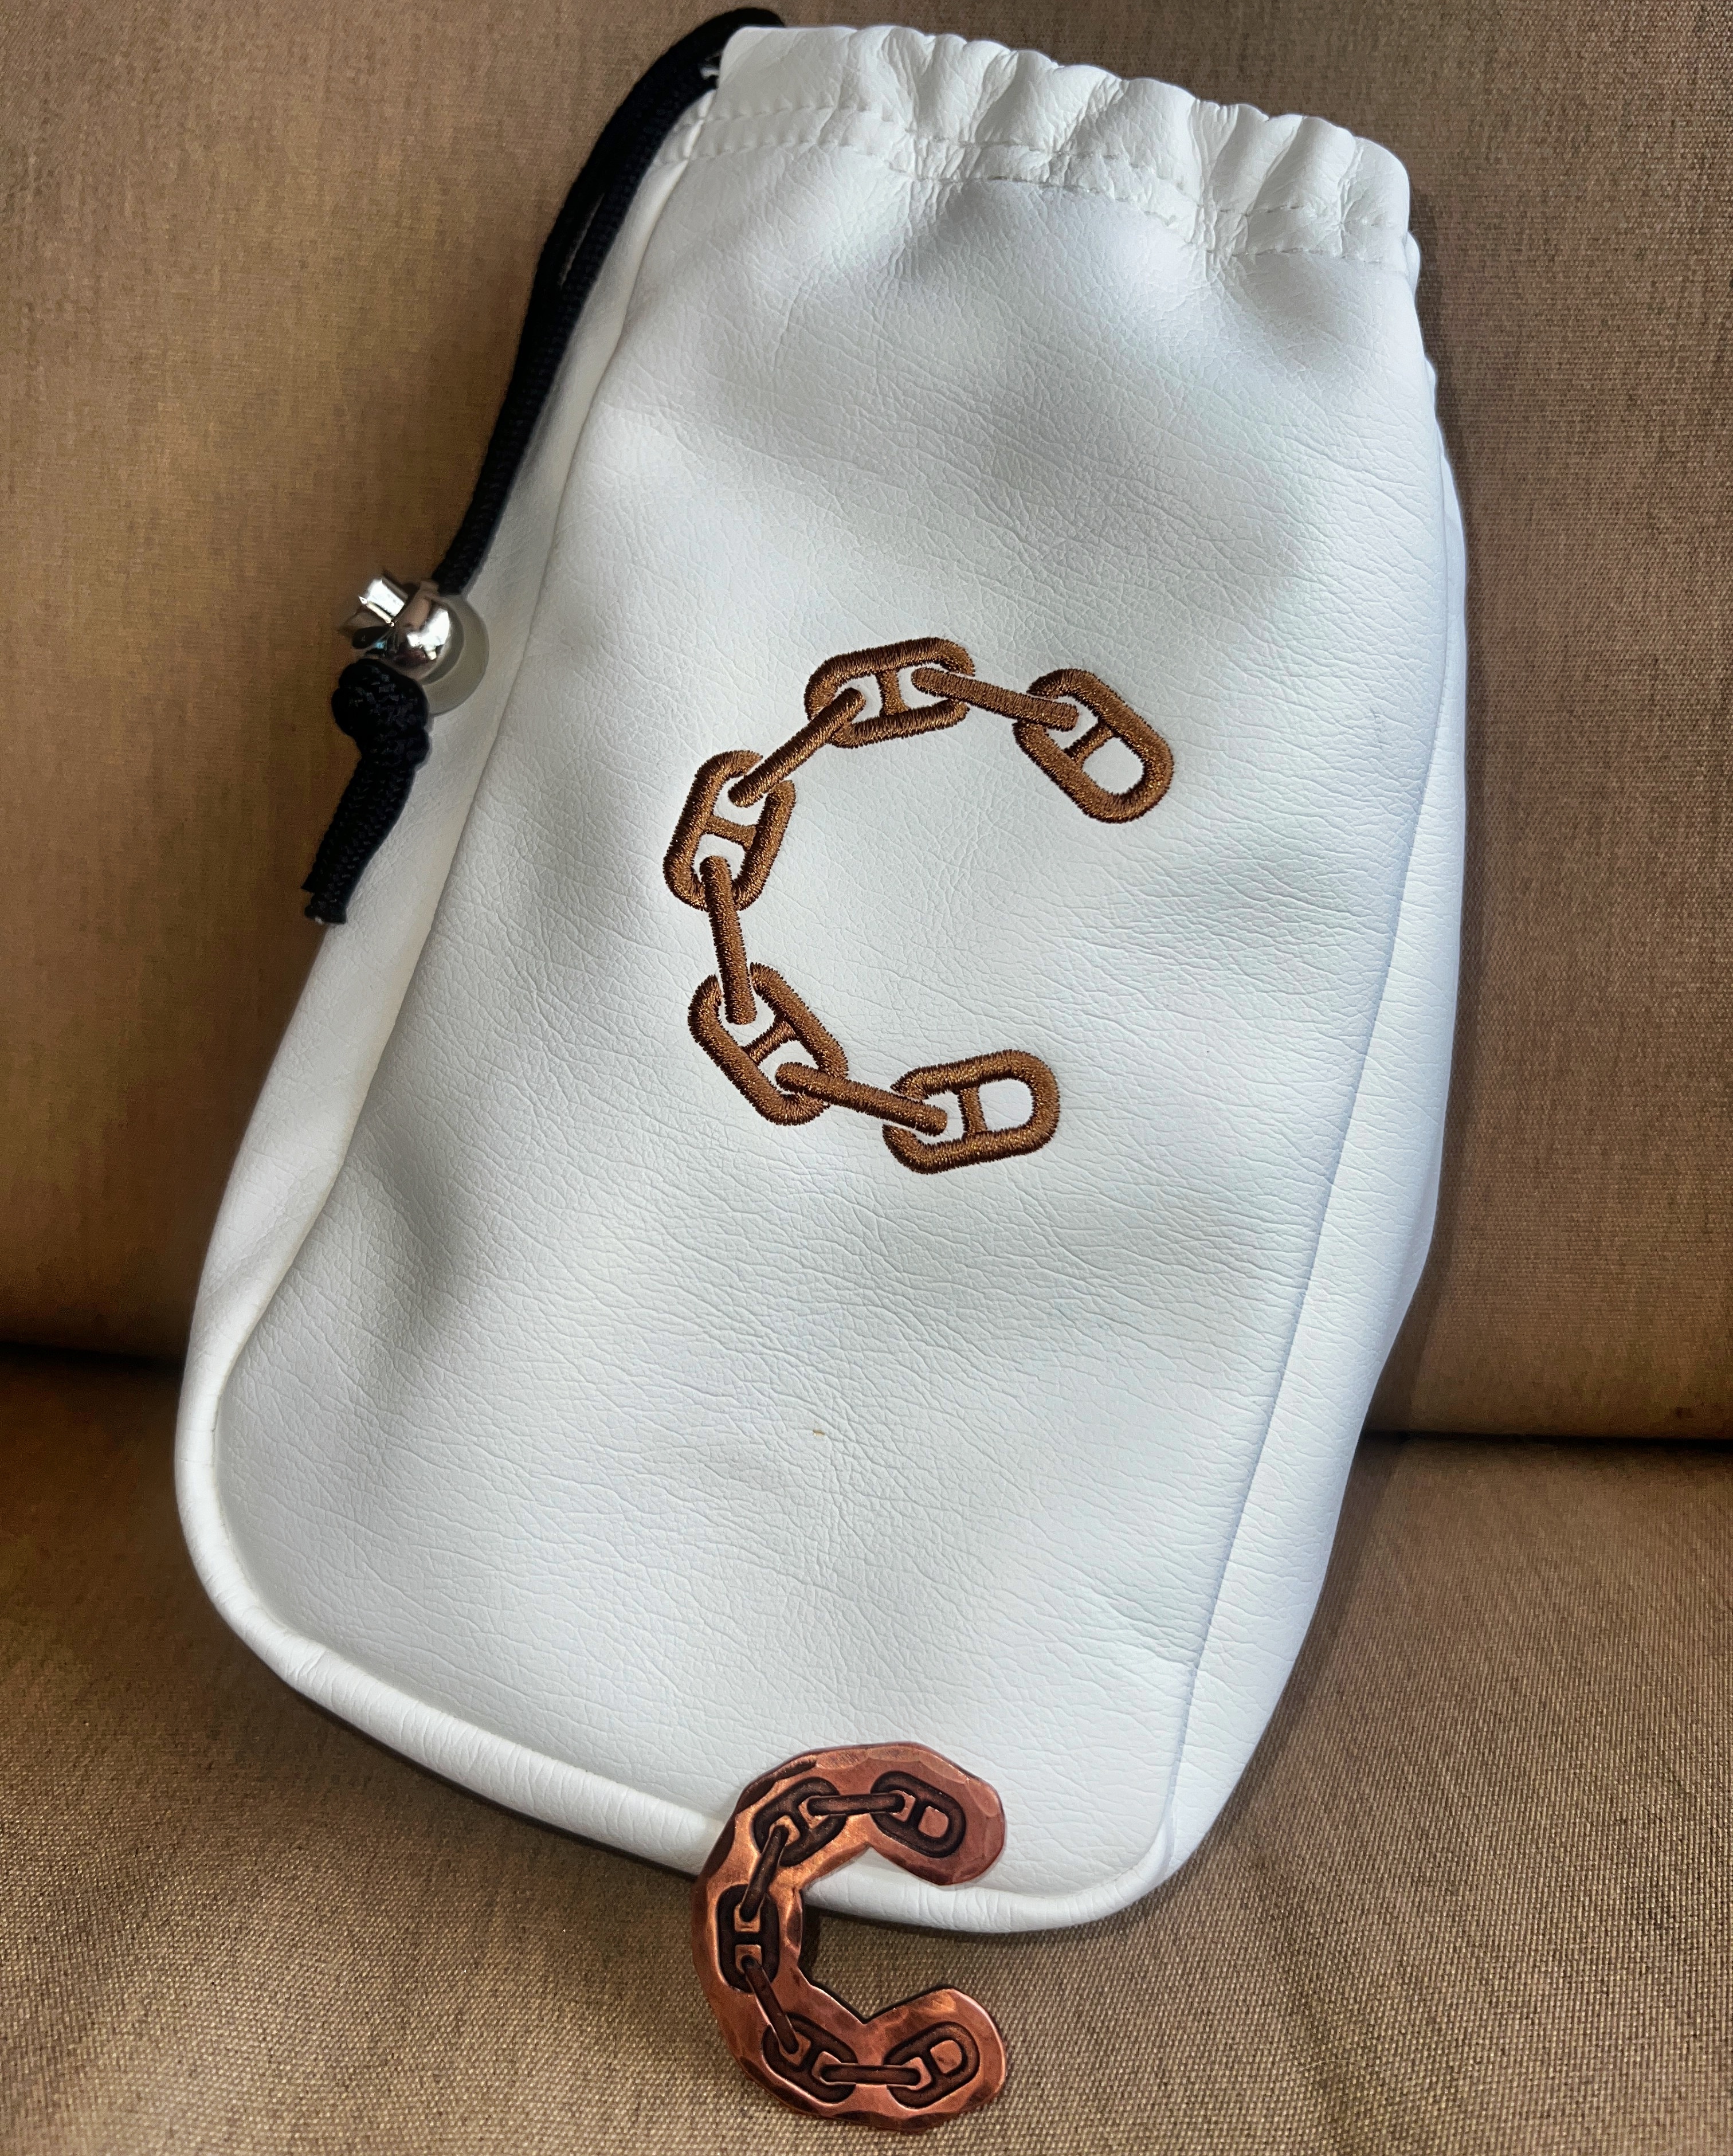 The Chain Streamsong Valuables bag and Ball Marker